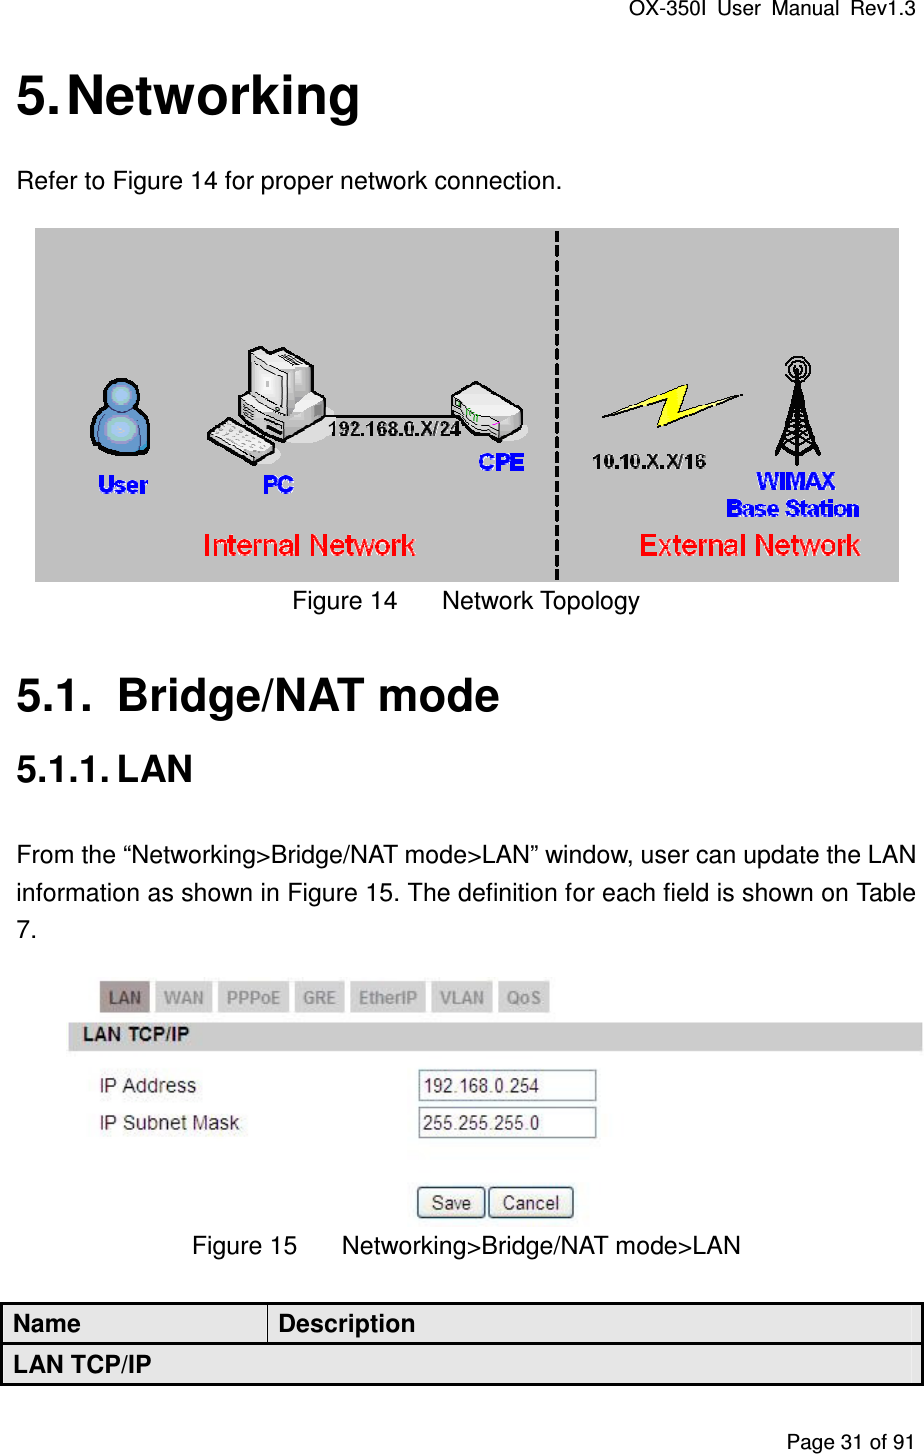 OX-350I  User  Manual  Rev1.3 Page 31 of 91 5. Networking Refer to Figure 14 for proper network connection.  Figure 14  Network Topology 5.1.  Bridge/NAT mode 5.1.1. LAN From the “Networking&gt;Bridge/NAT mode&gt;LAN” window, user can update the LAN information as shown in Figure 15. The definition for each field is shown on Table 7.  Figure 15  Networking&gt;Bridge/NAT mode&gt;LAN Name  Description LAN TCP/IP 